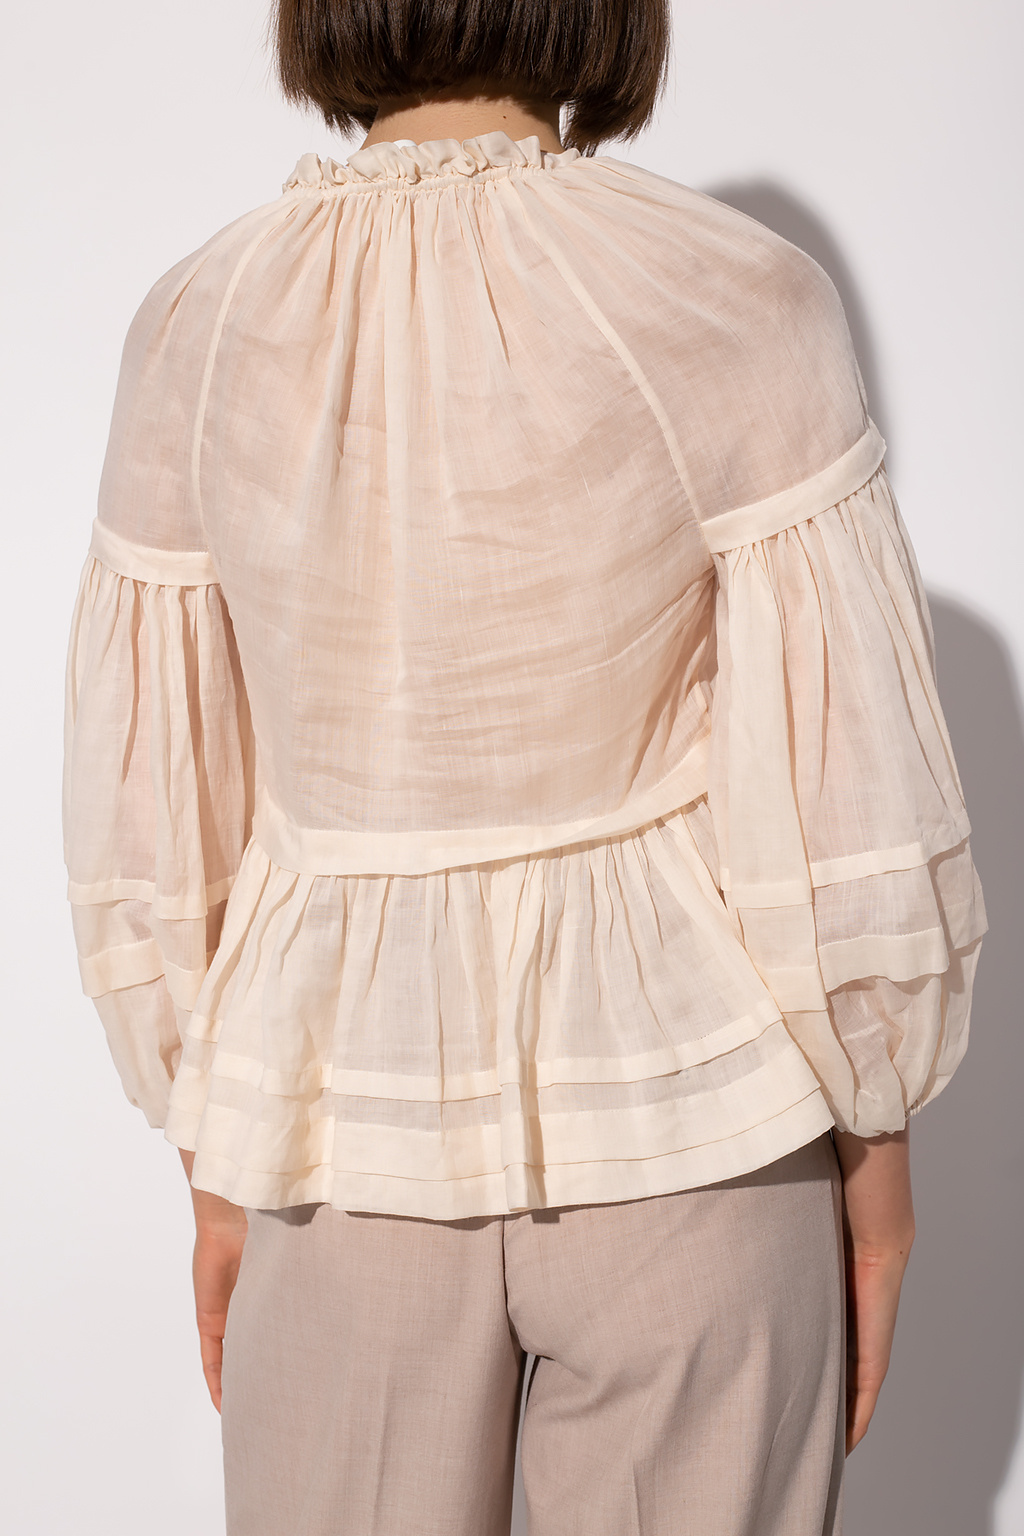 Zimmermann Top with puff sleeves